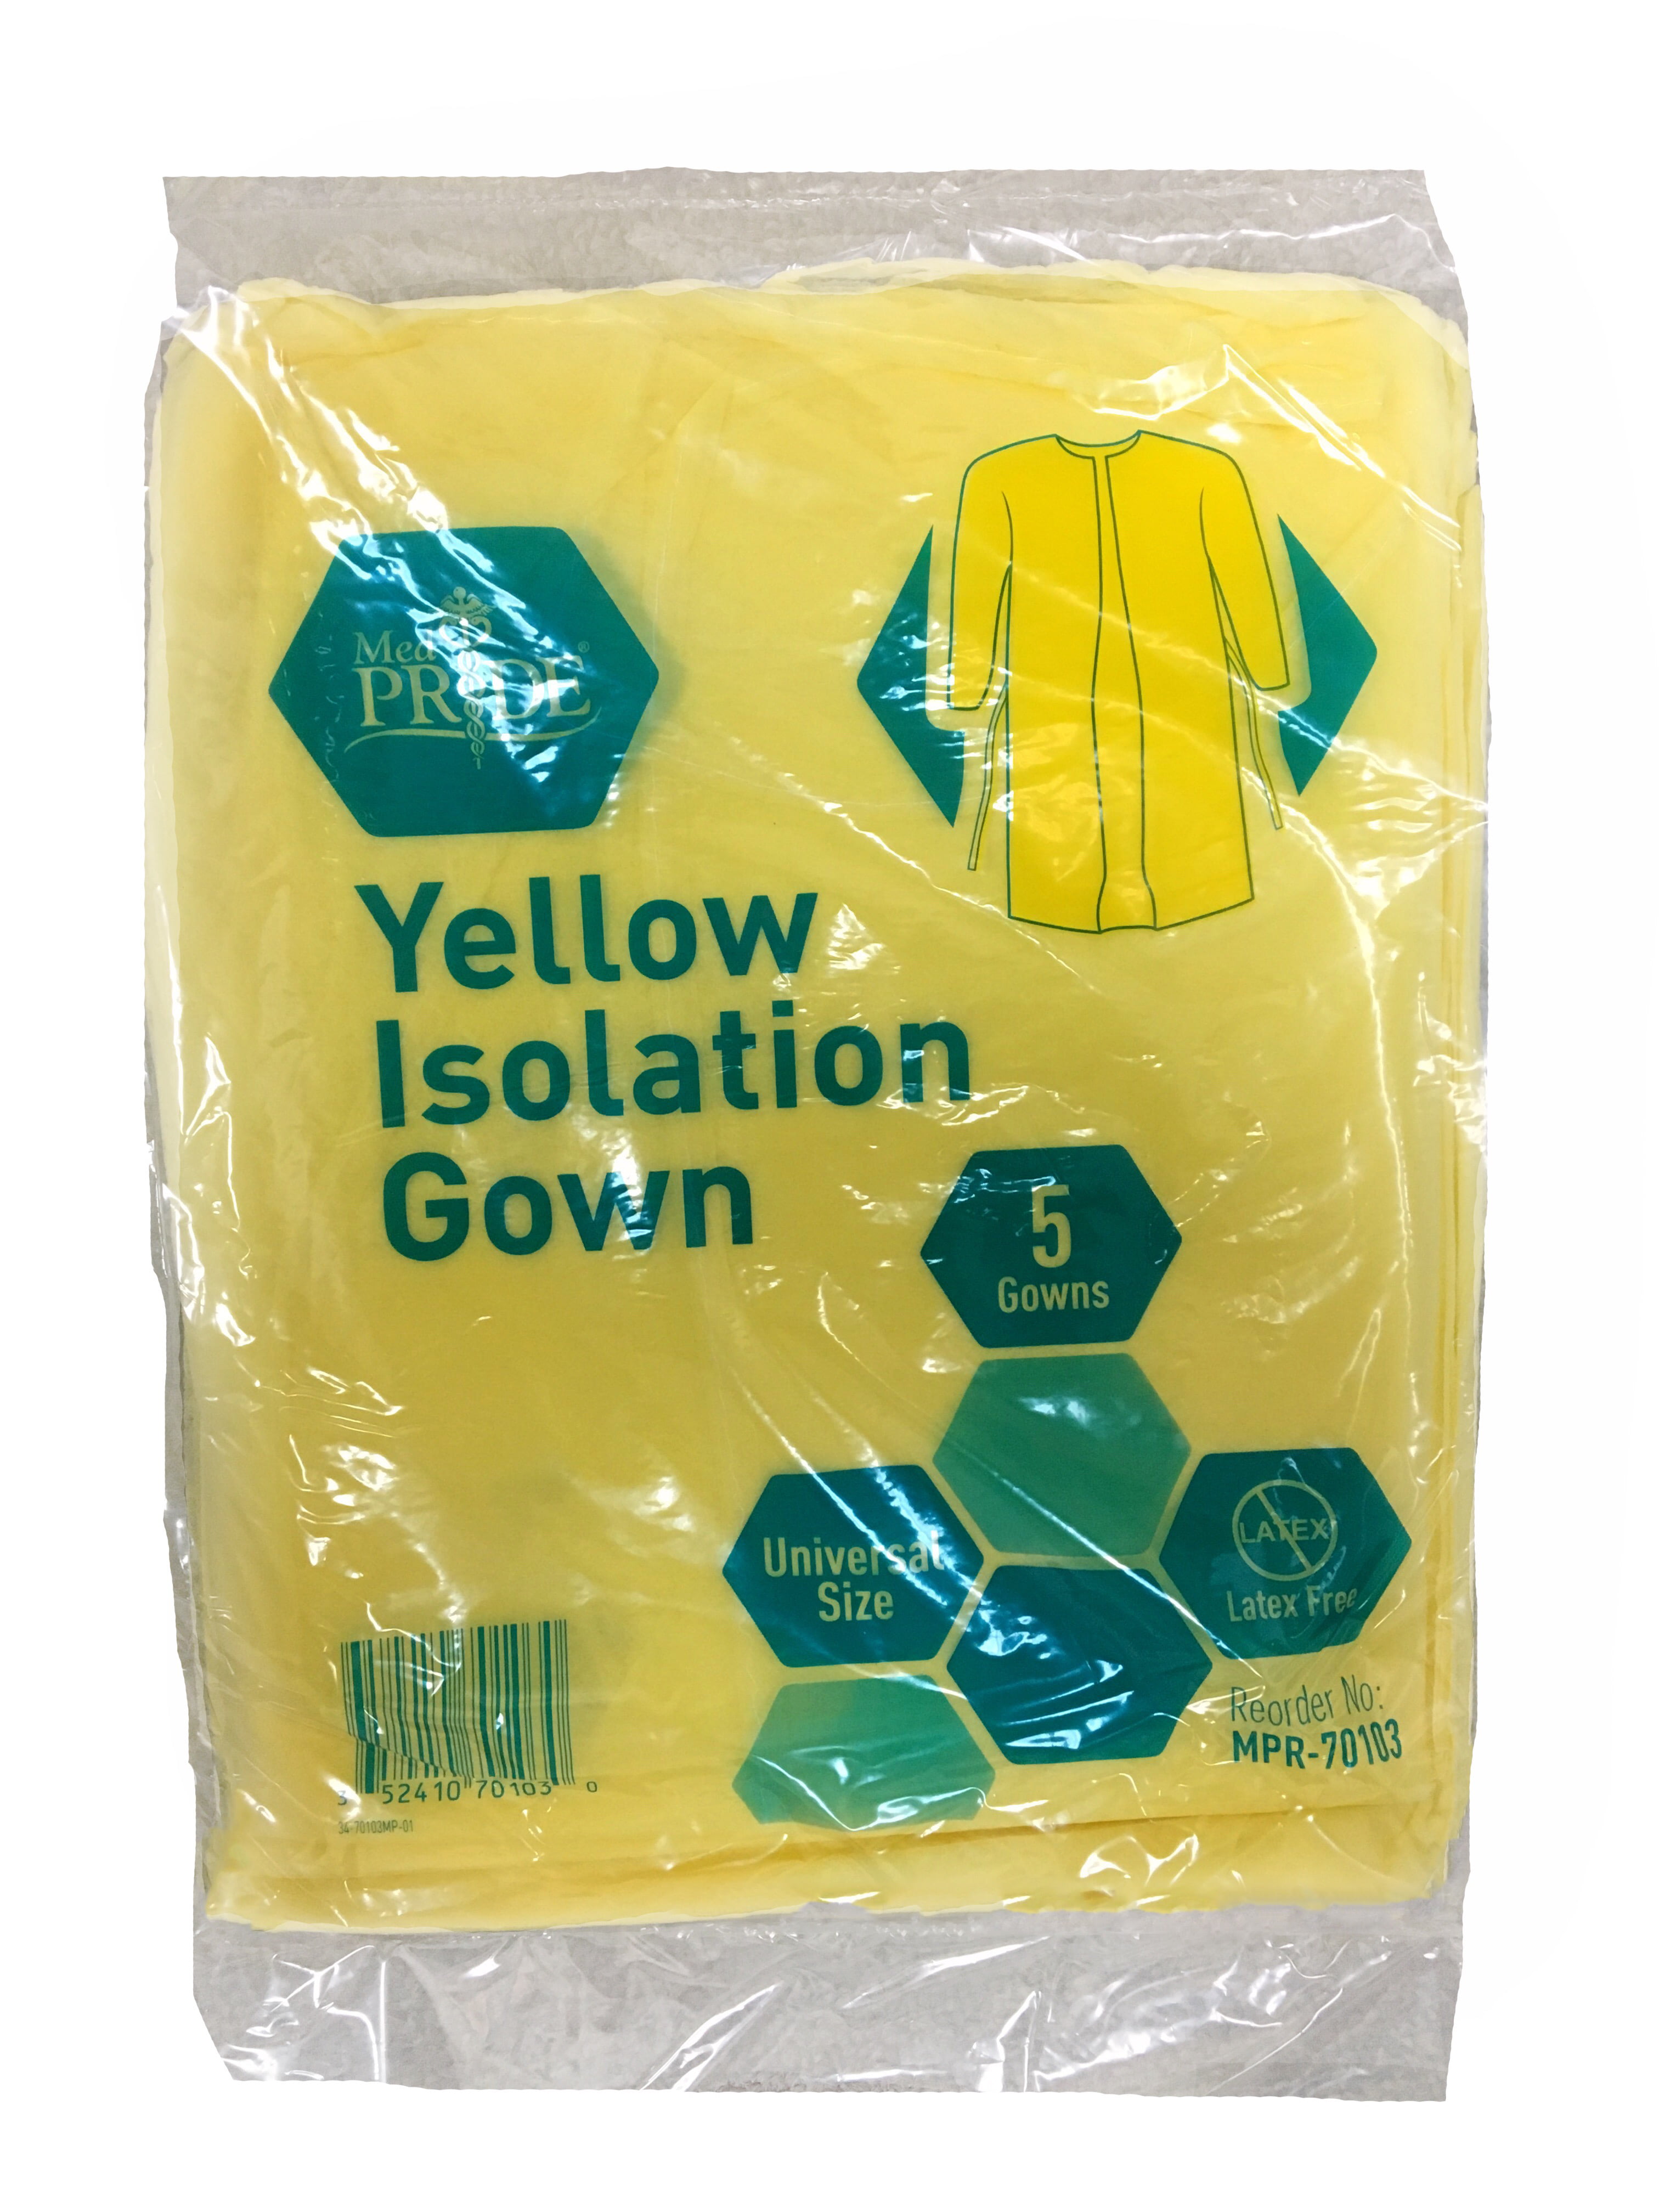 Medpride Yellow Isolation Gown 5 Pack Elastic Cuffs